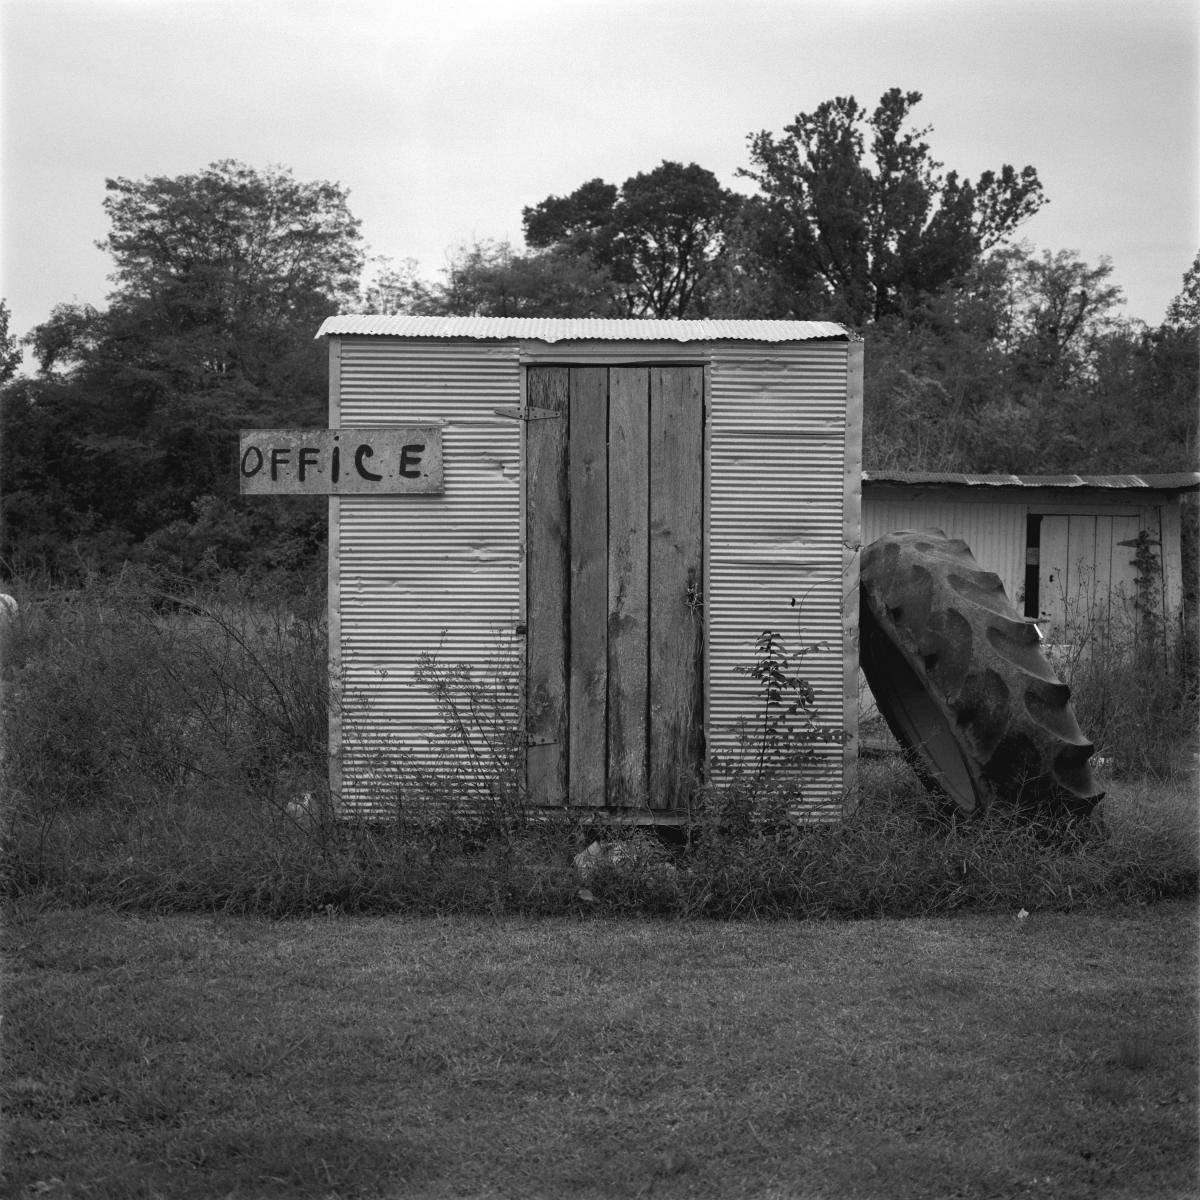 <p><center>Holmes County, Mississippi:</center></p>
A farm toolshed. : Images : AMERICAN BLACK FARMERS PROJECT - John Ficara